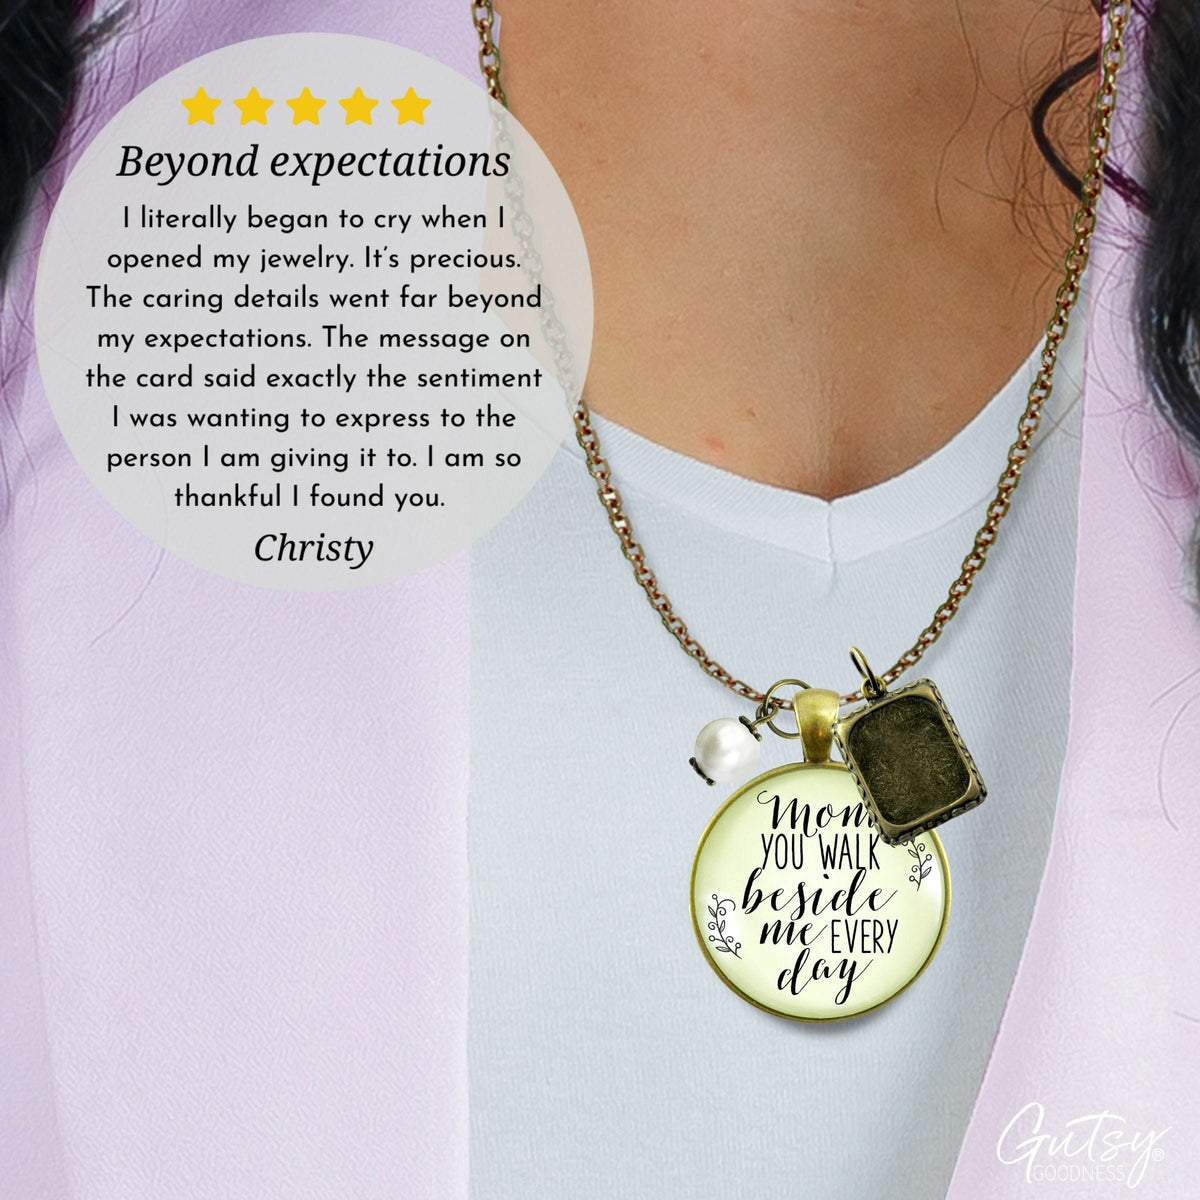 Gutsy Goodness Mom Remembrance Necklace You Walk Photo Frame Memorial Gift - Gutsy Goodness Handmade Jewelry;Mom Remembrance Necklace You Walk Photo Frame Memorial Gift - Gutsy Goodness Handmade Jewelry Gifts